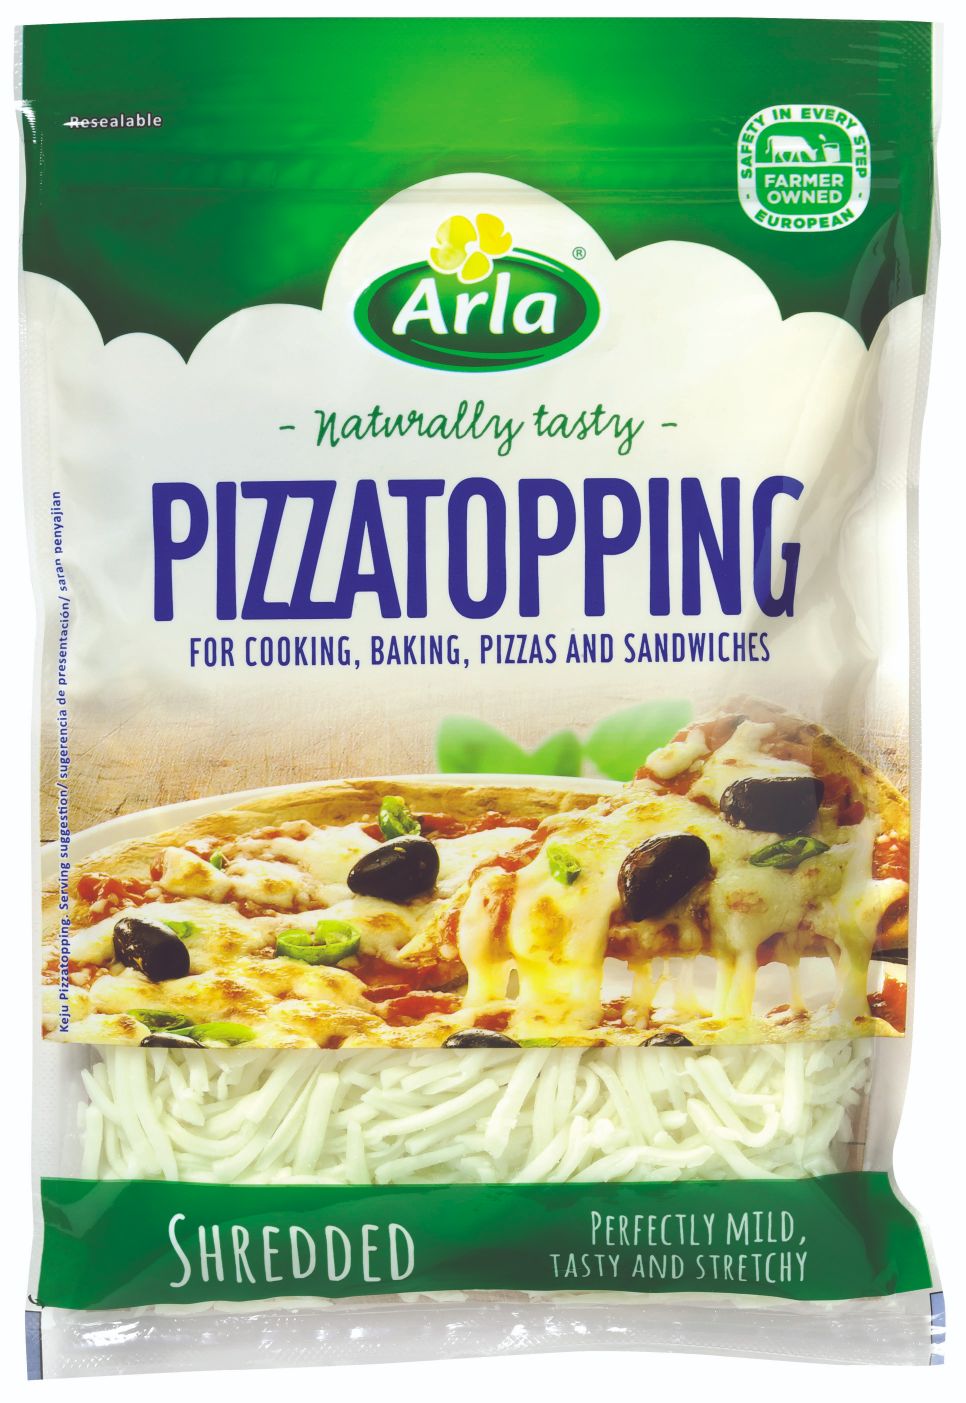 Delicious Shredded Pizza Topping | Arla Inc.